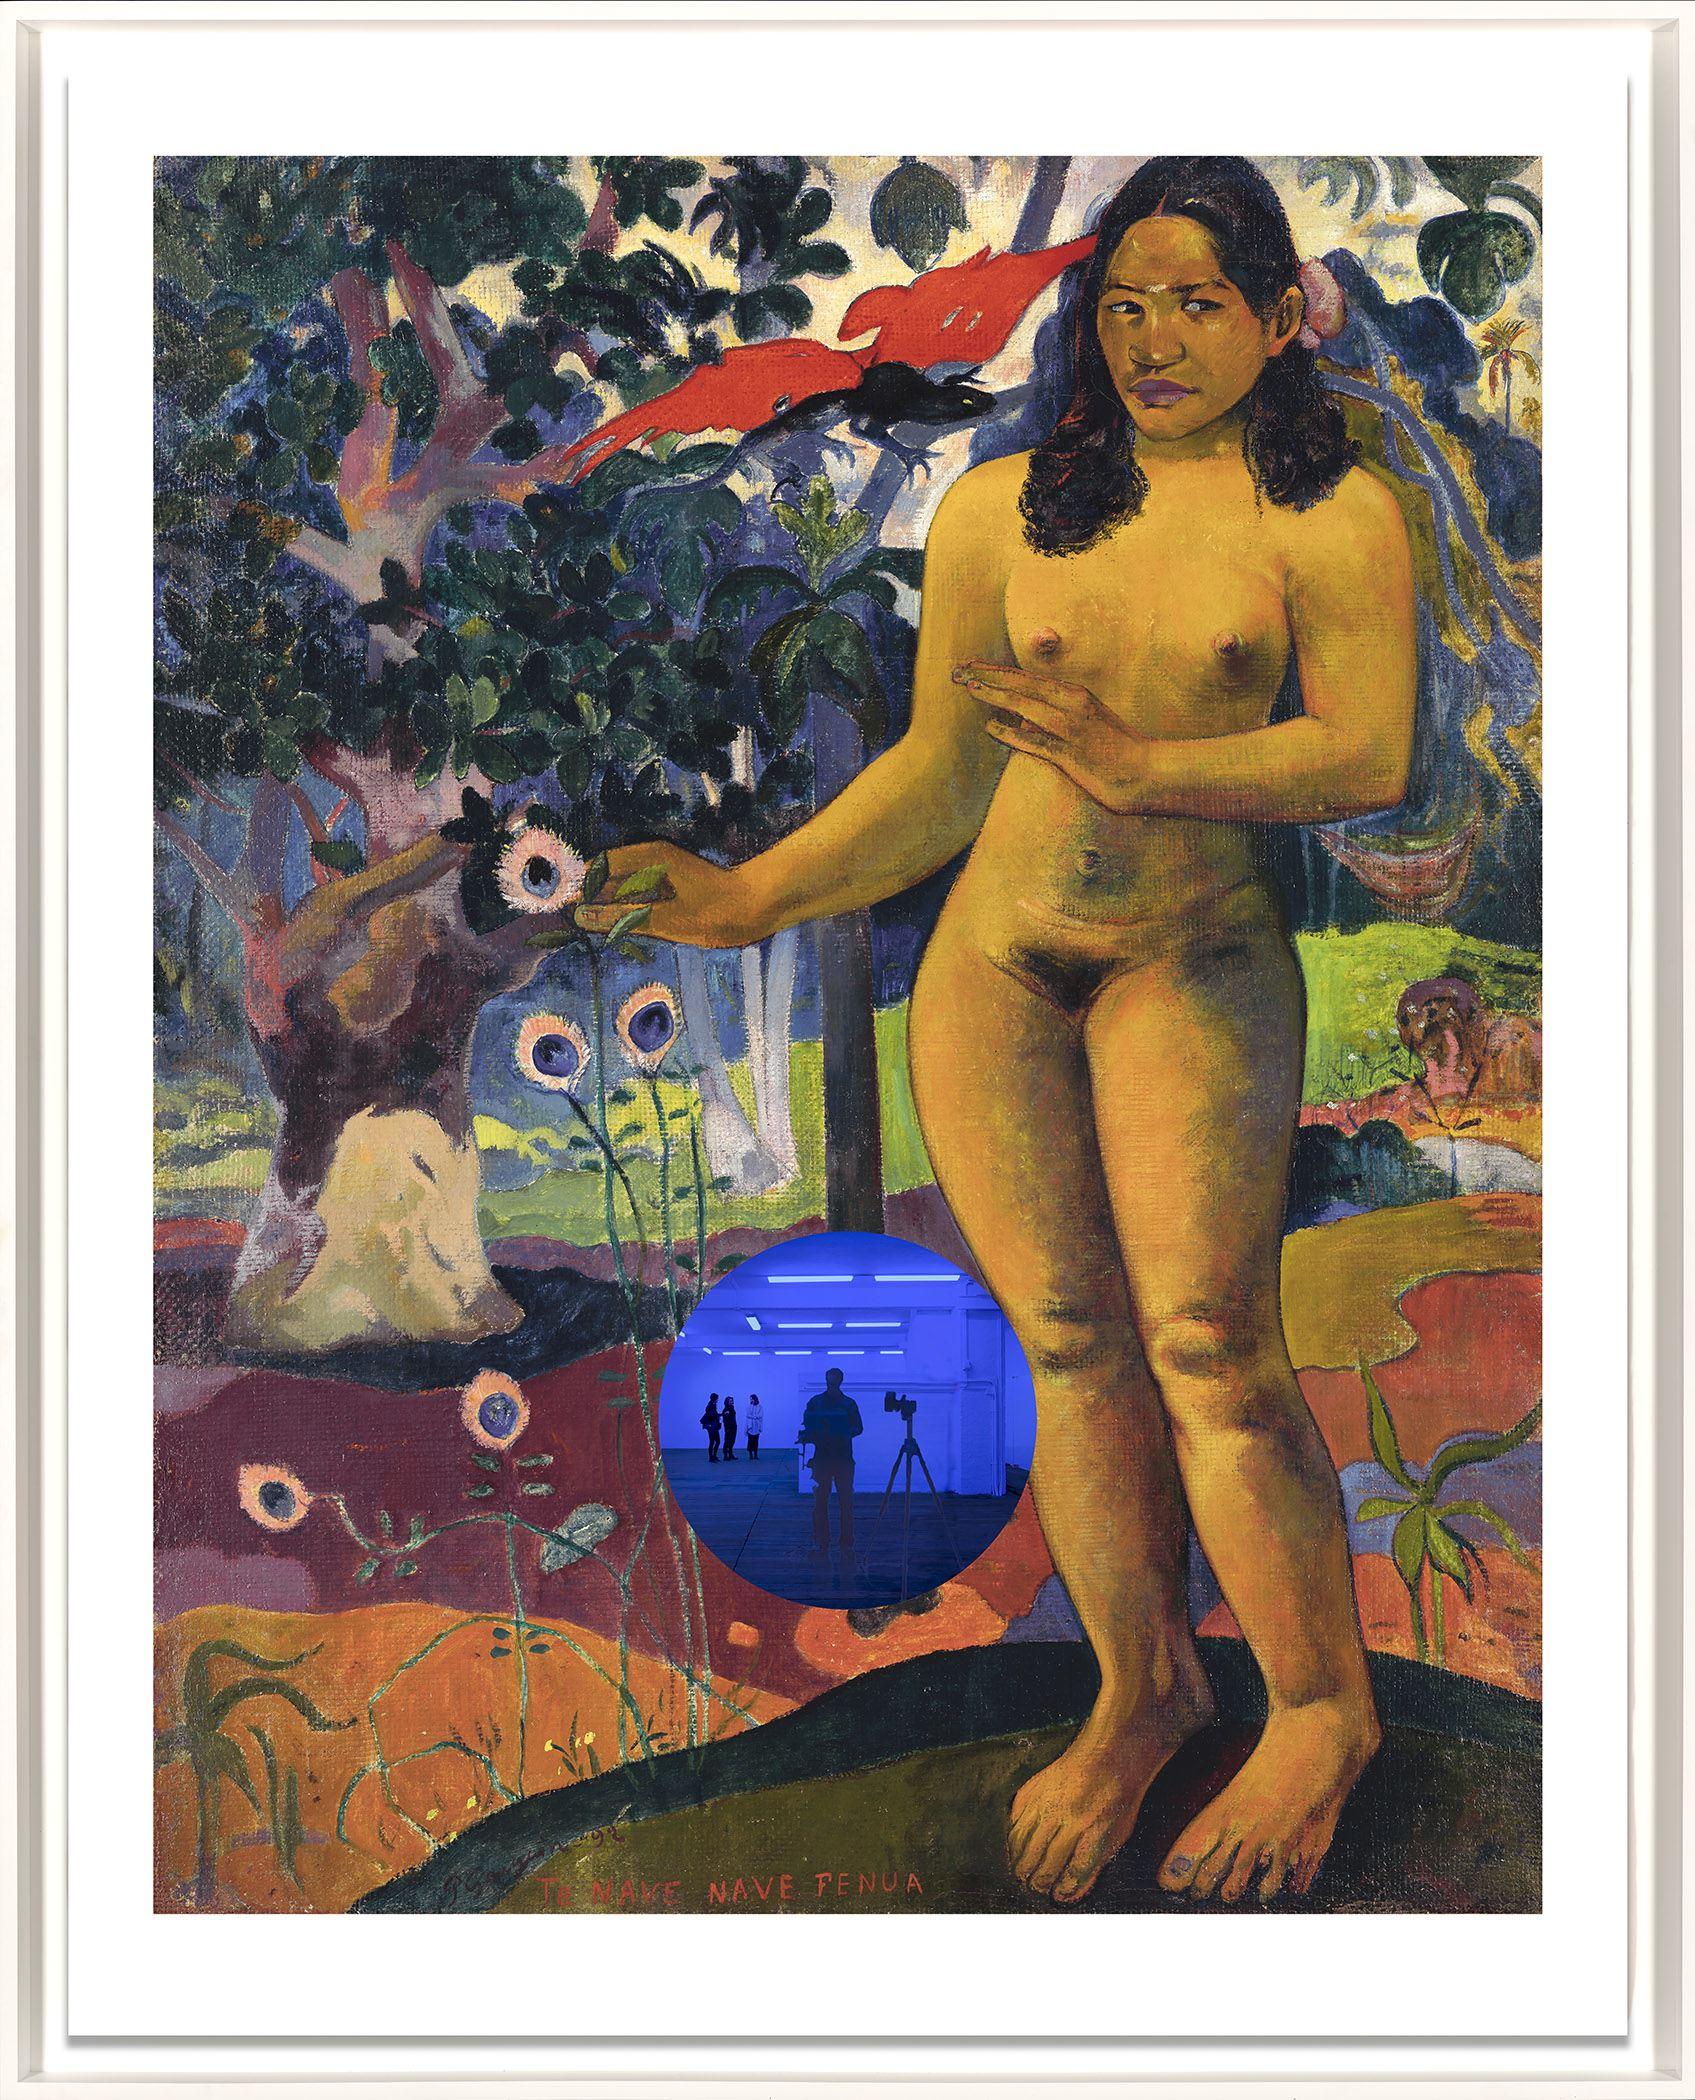 Jeff Koons
Gazing Ball (Gauguin Delightful Land), 2017
Signed and dated lower margin
Archival pigment print on Innova rag paper, glass
Image Dimensions:
40 3/4 x 32 1/8inches 103.5 x 81.6cm
Frame dimensions:
41 3⁄4” x 33 3/8inches 106 x